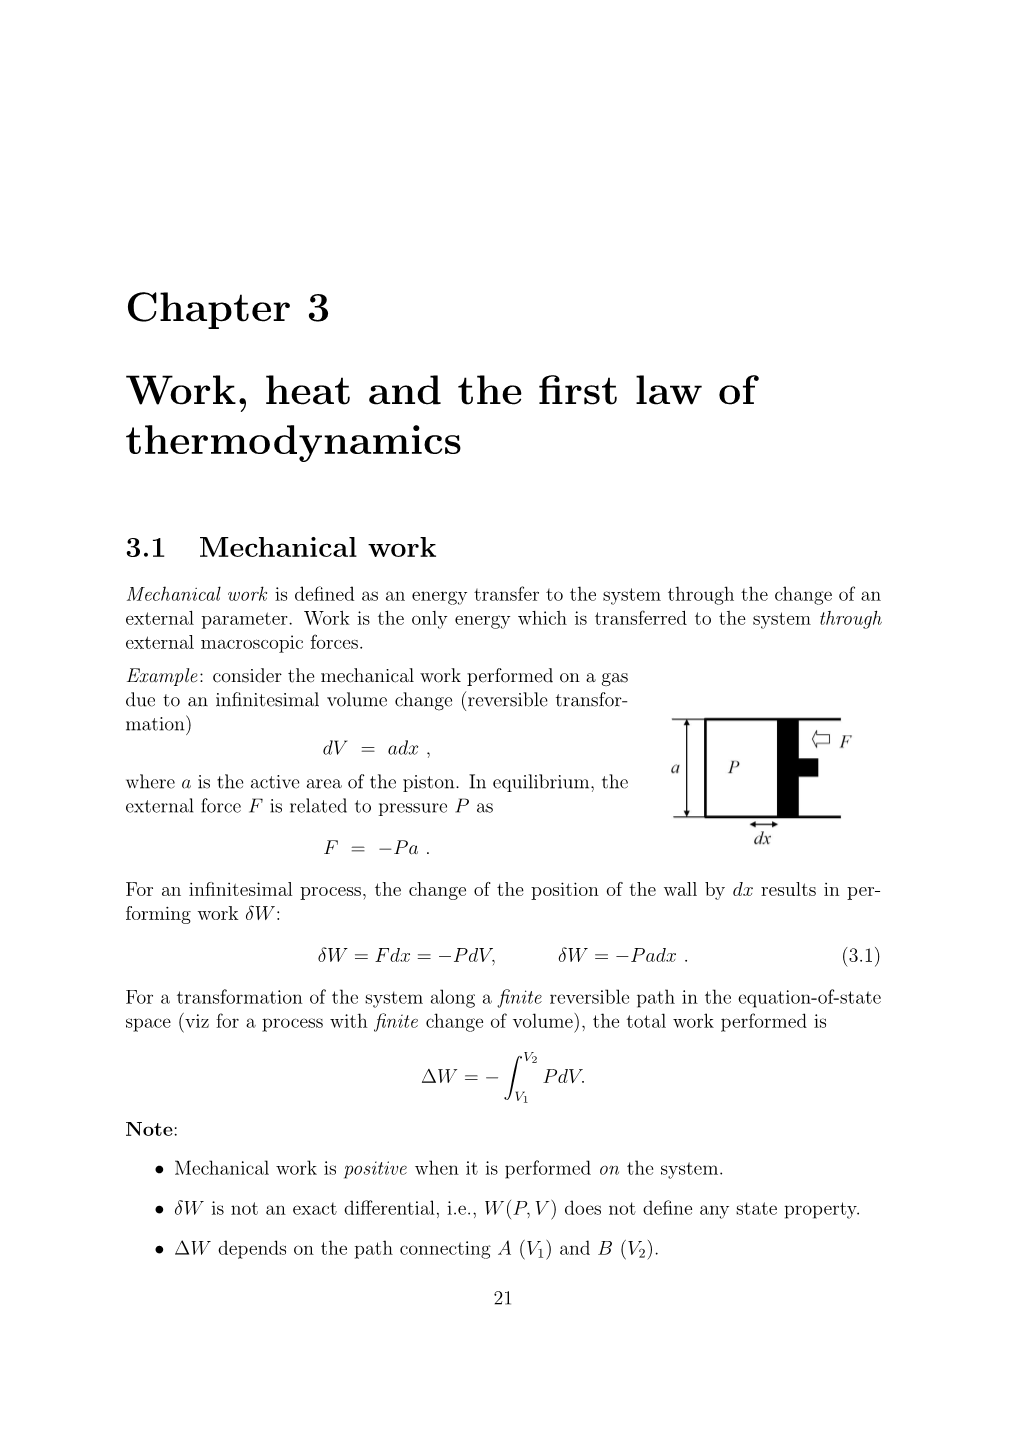 Chapter 3 Work, Heat and the First Law of Thermodynamics